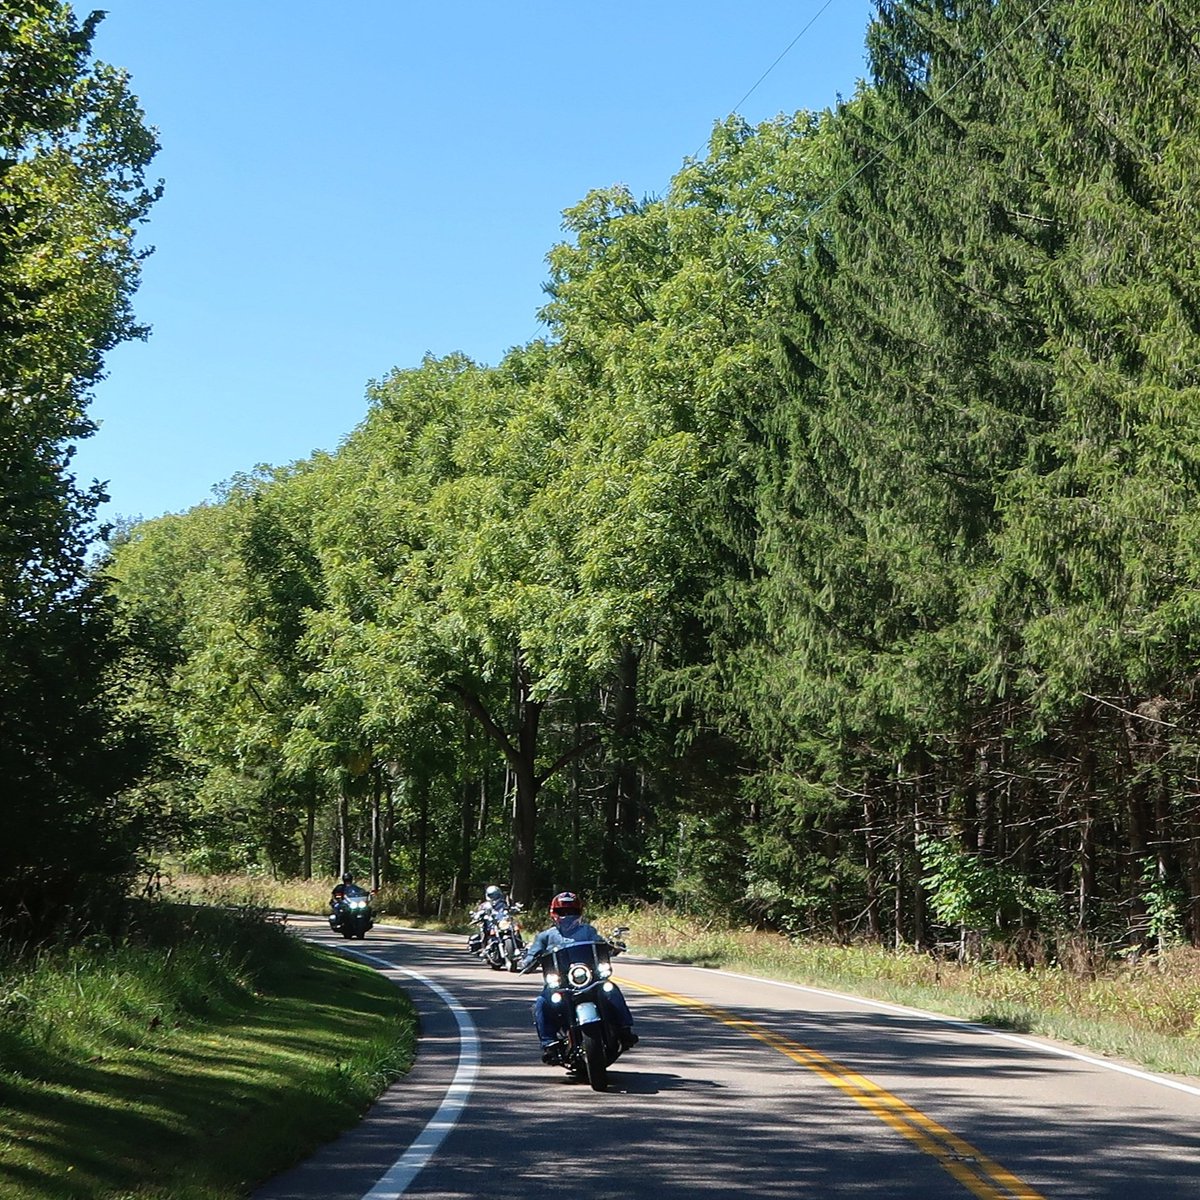 I love riding alongside pine trees.  They smell awesome! Who knows that fresh pine smell?
.
#MotorcycleDen #pinetrees #pineforest #route56 #harleydavidson #yamahamotorcycles #groupride #motorcycleride